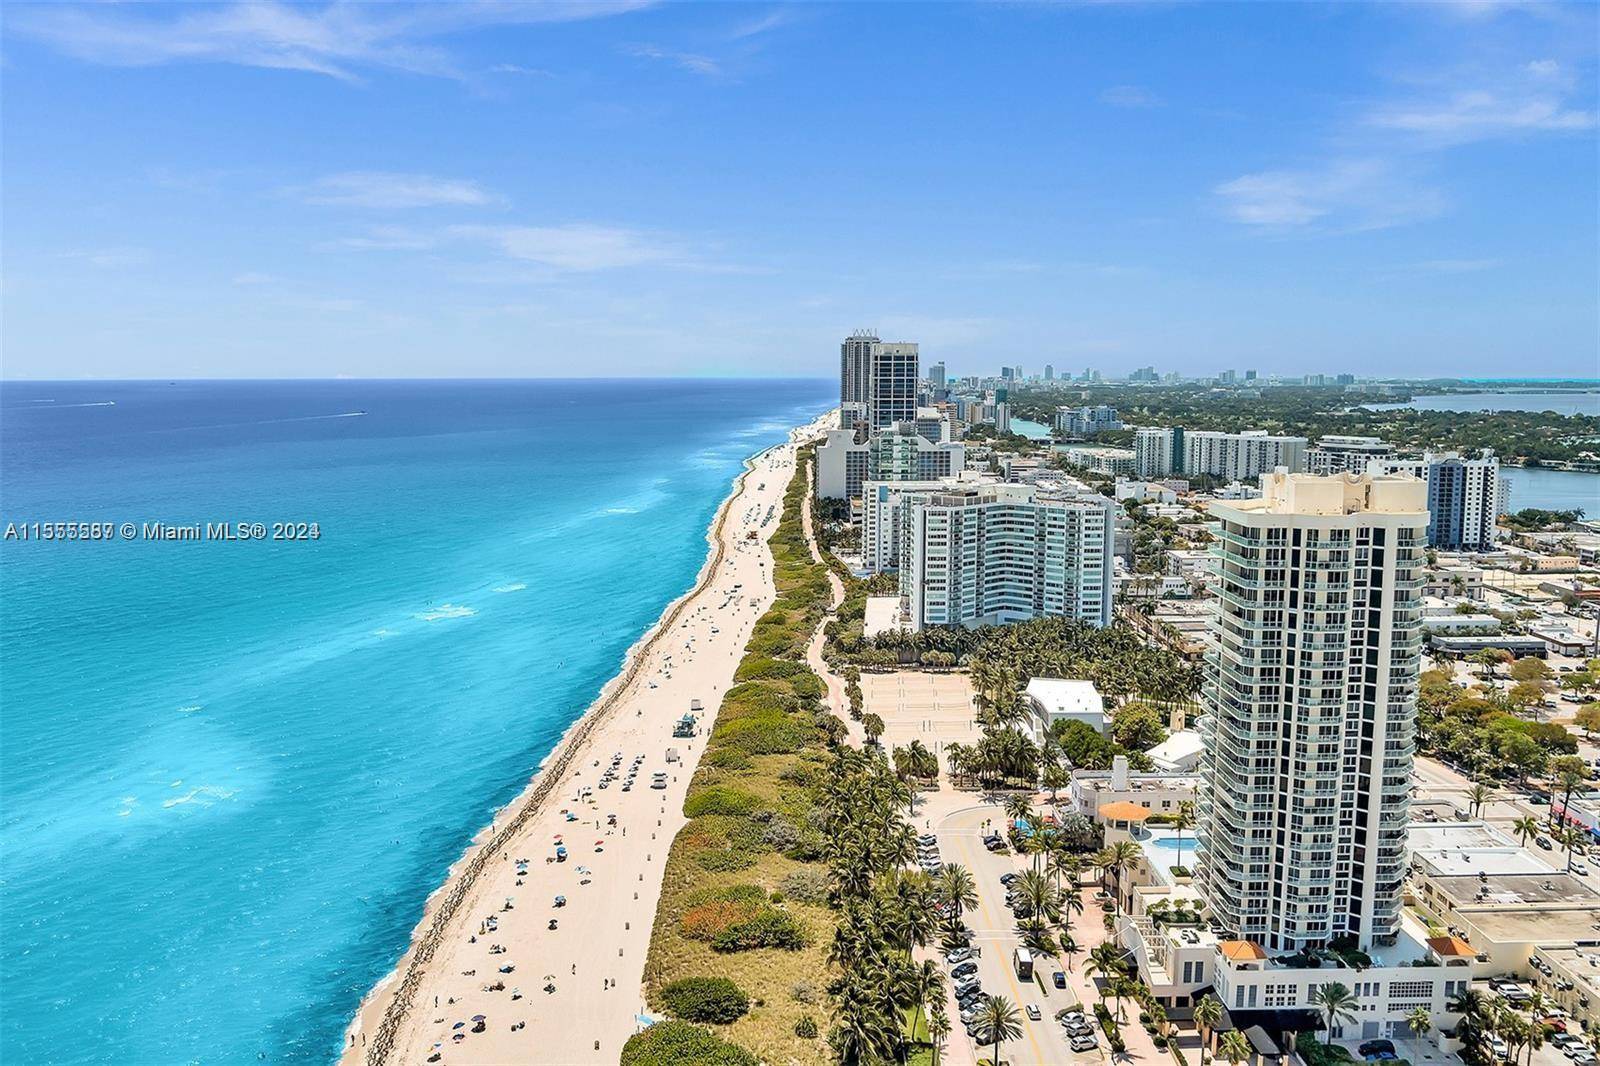 Stunning ocean view PH Furnished Summer Seasonal Condo rental 2 2 condo in ideal location close to dining, shopping, worship, entertainment, expressways Miami or Ft Laud all South Florida has ...